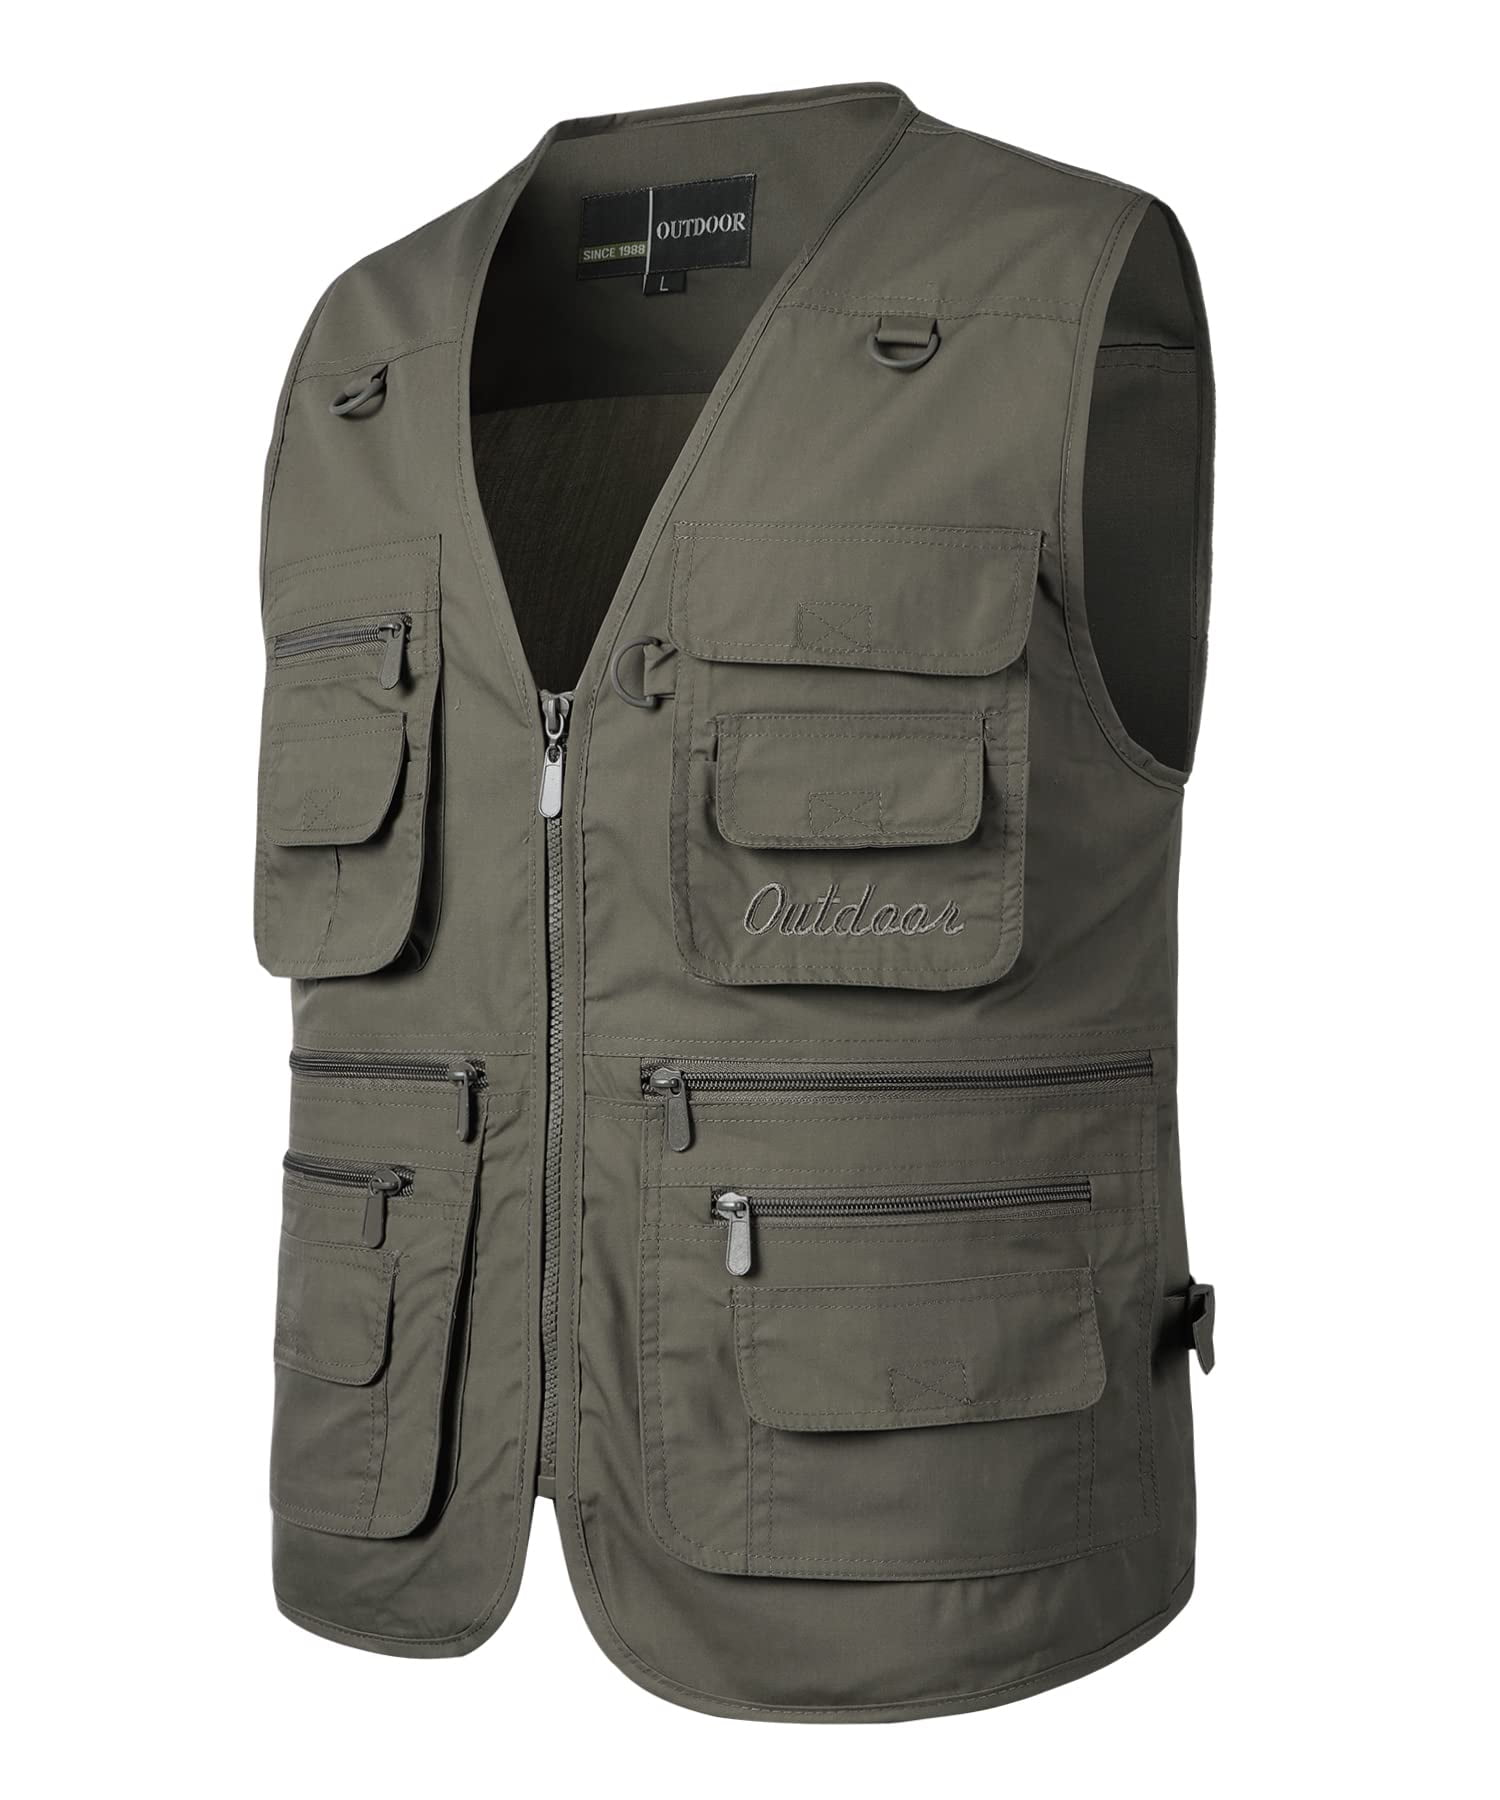 Men's Vest Sleeveless Jacket with Many Practical Pockets Outdoor Vest  Cotton Fishing Vest Leisure Hunting Trekking Hiking Angler Camping Safari,  Army